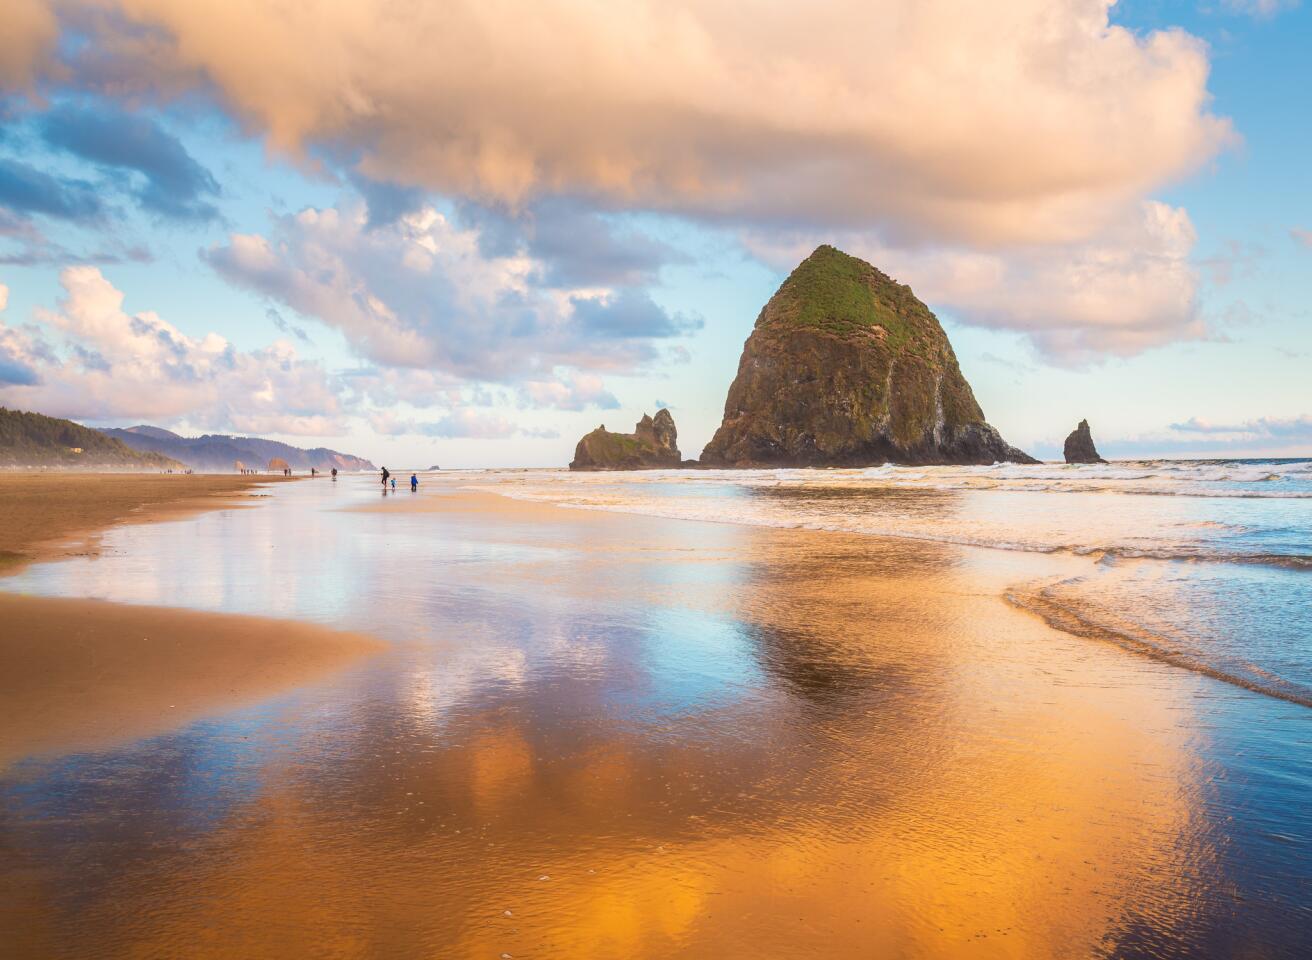 This spot is famous for Haystack Rock, pictured. And while the area only gets an average of 144 days of sun a year, the shoreline is perfect for walks, sand castle construction and puffin sightings, according to Flight Network.